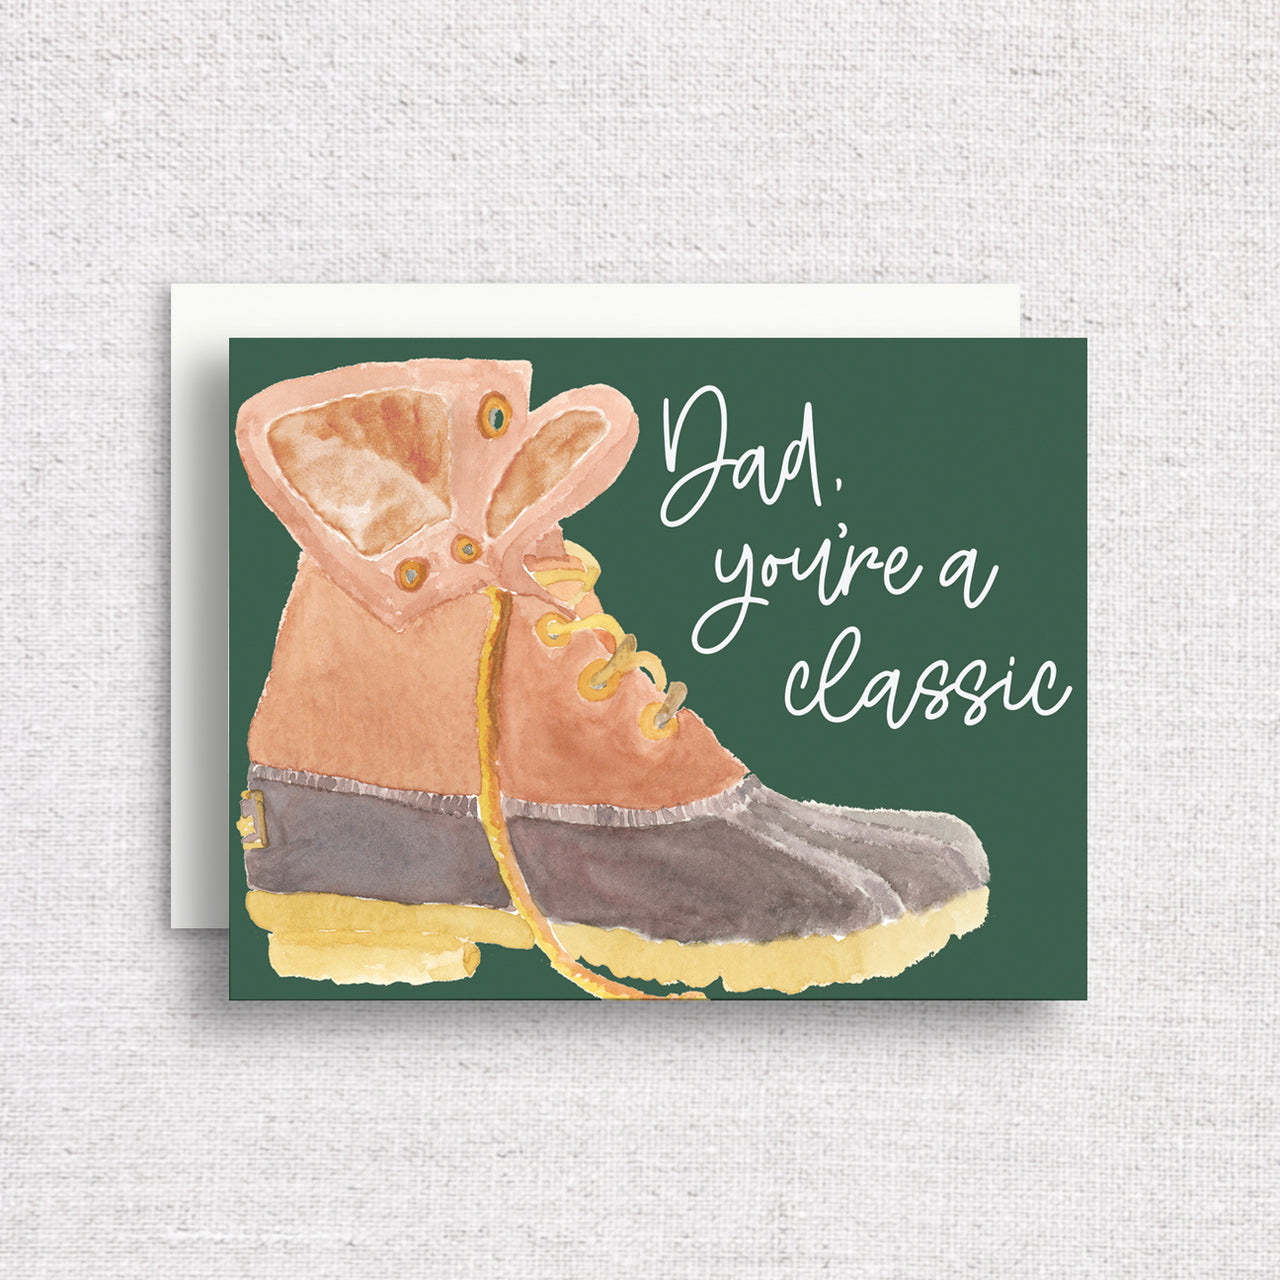 'Dad, You're a Classic' Bean Boot Greeting Card